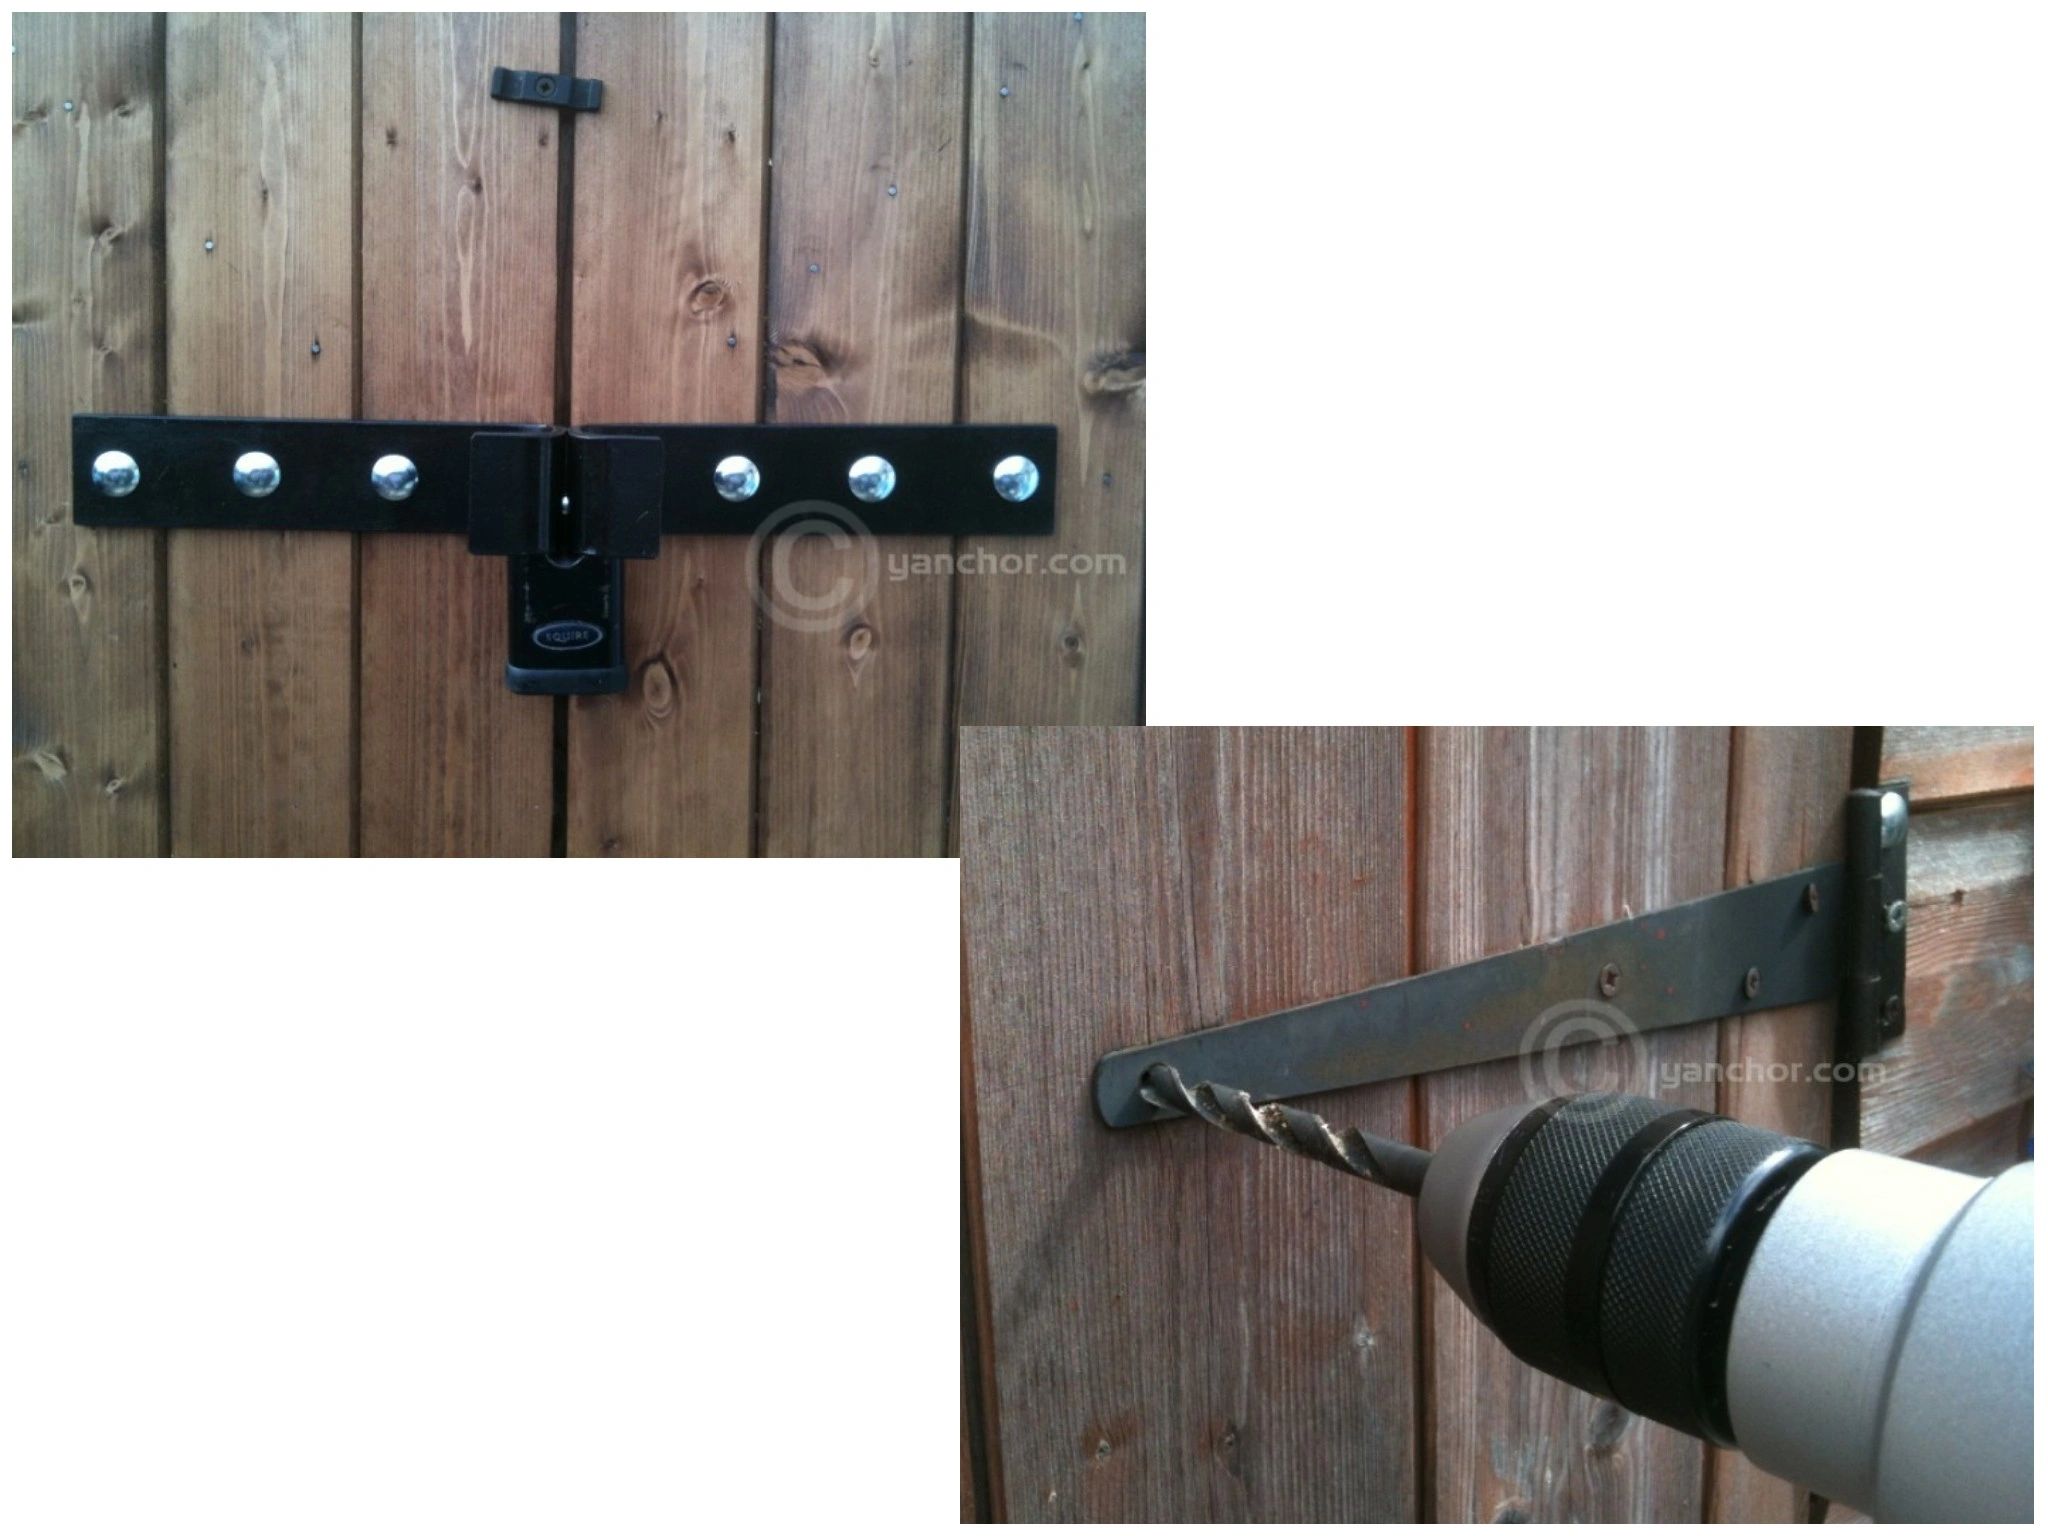 New to Market! Y anchor Heavy Duty Security hasp with top Side & Bottom Padlock Protection